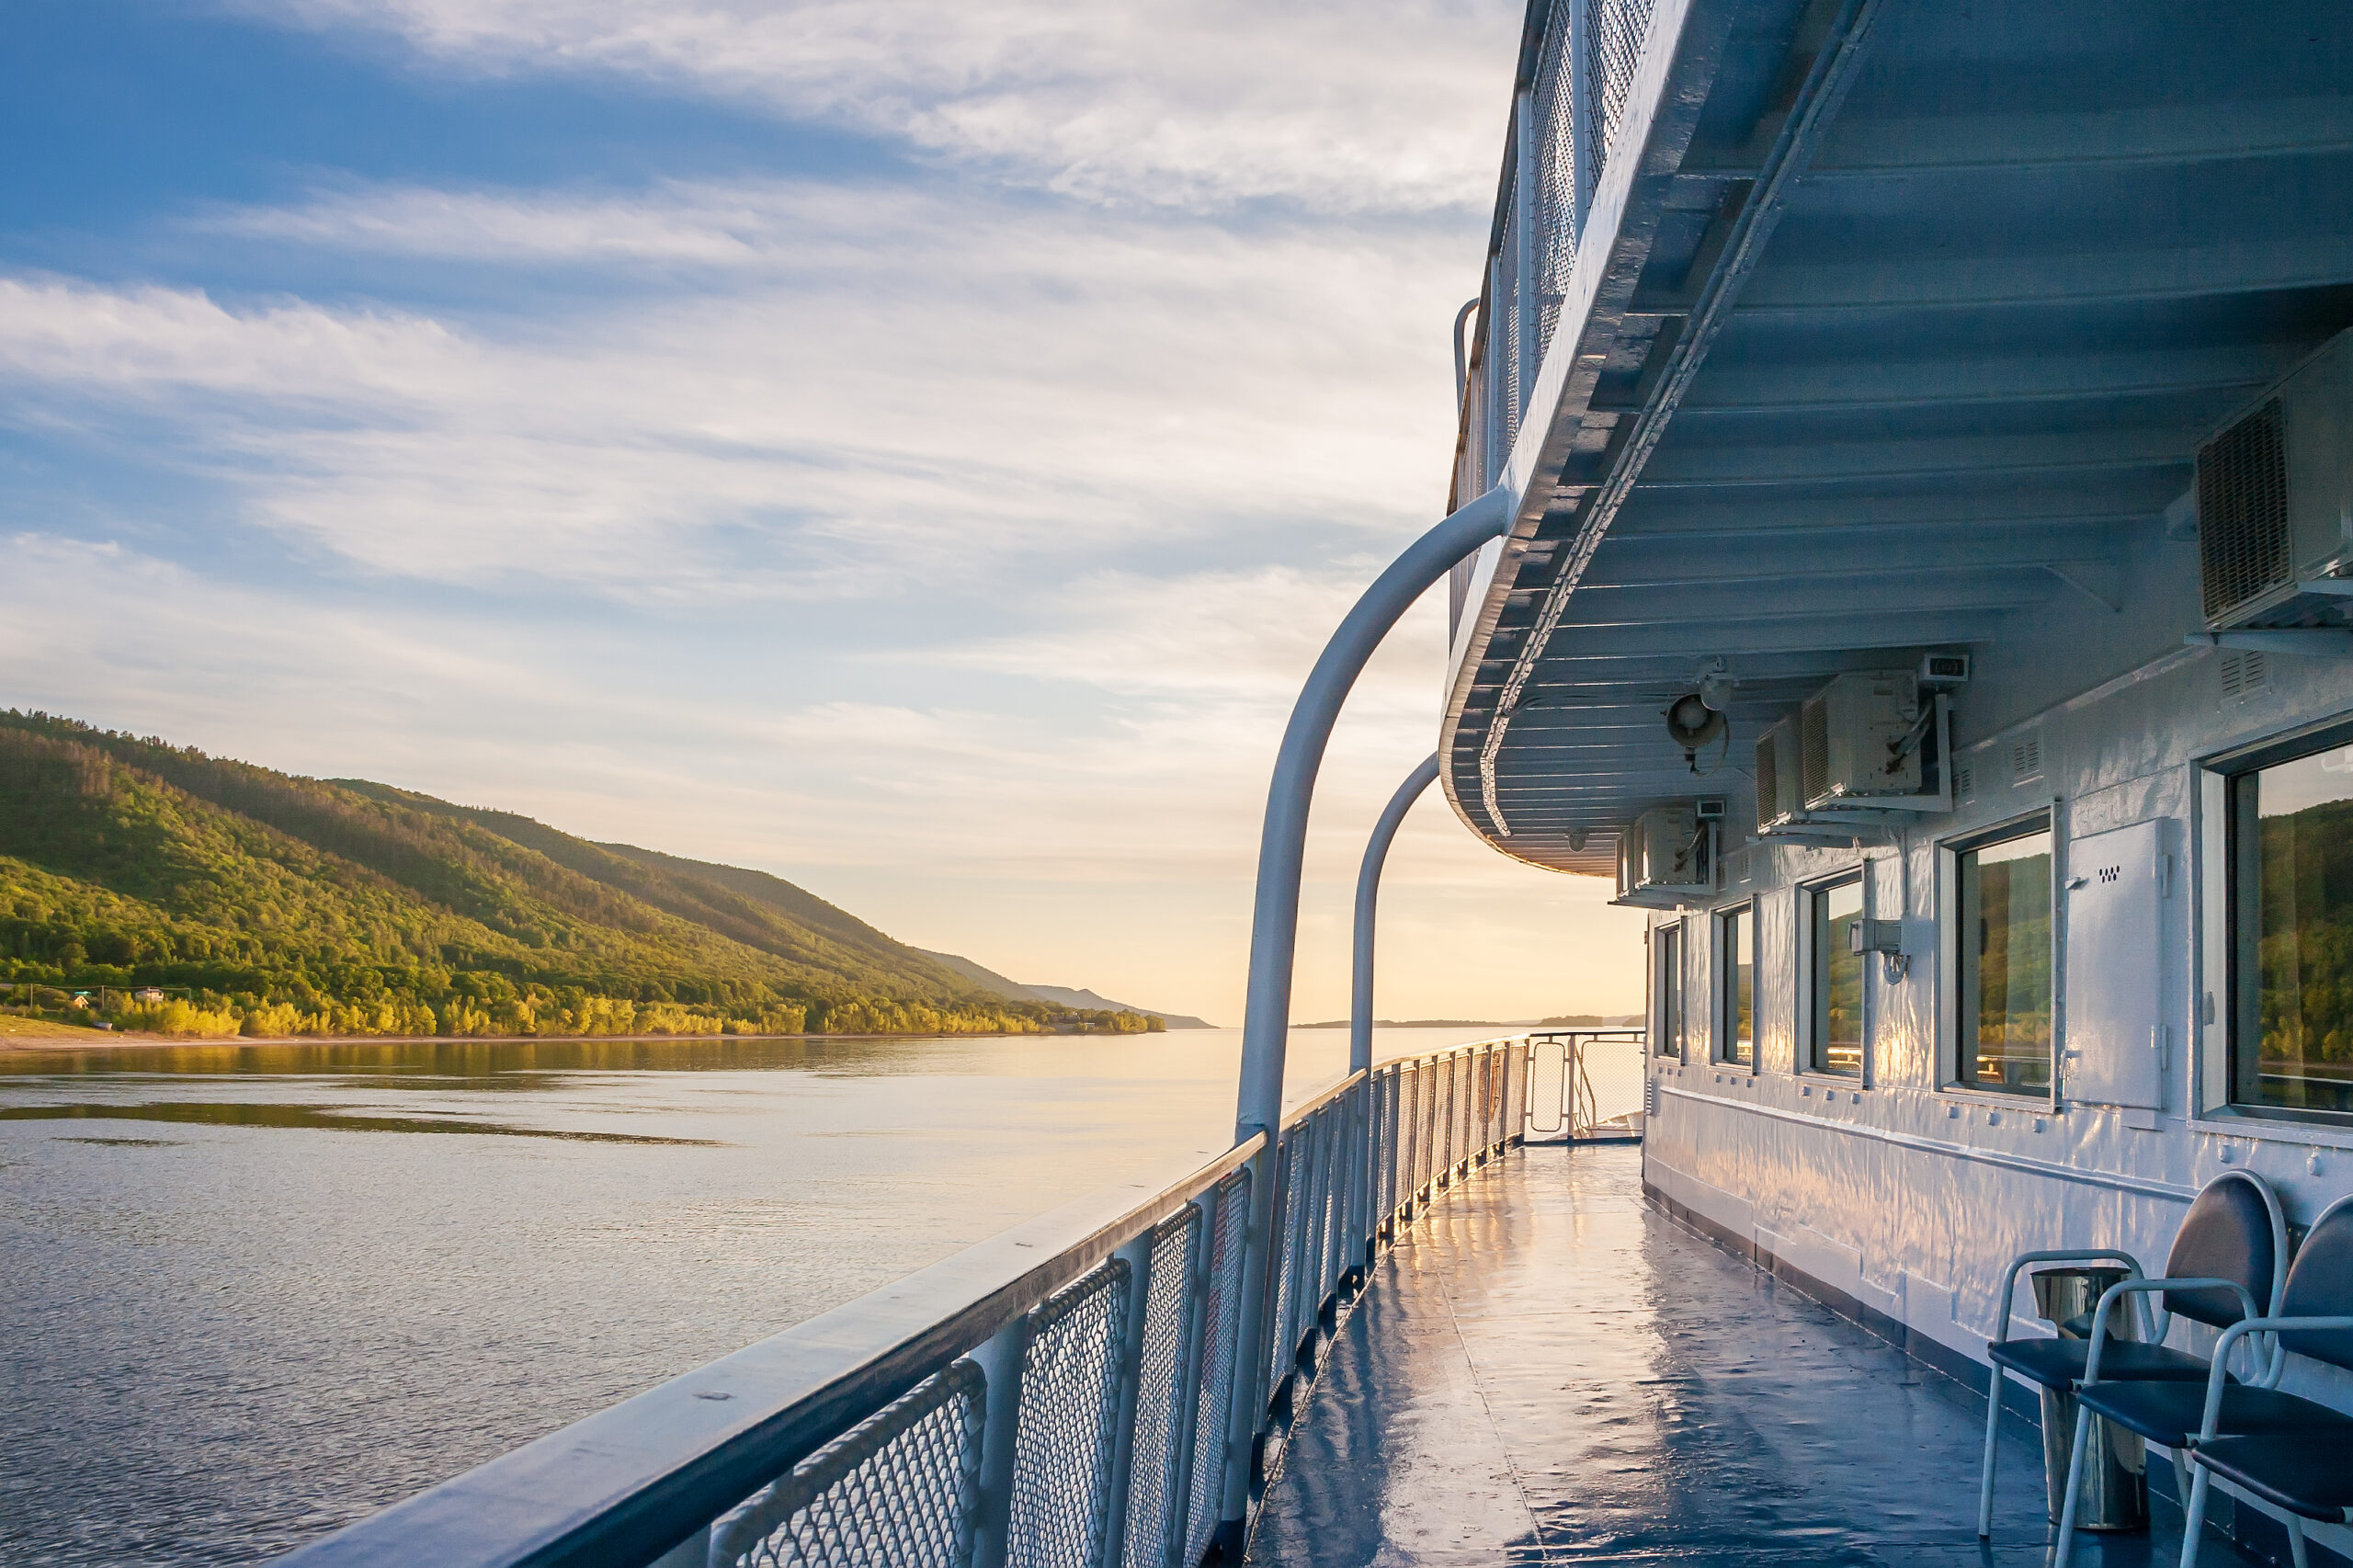 River Cruise vs. Ocean Cruise: Which is Right for You